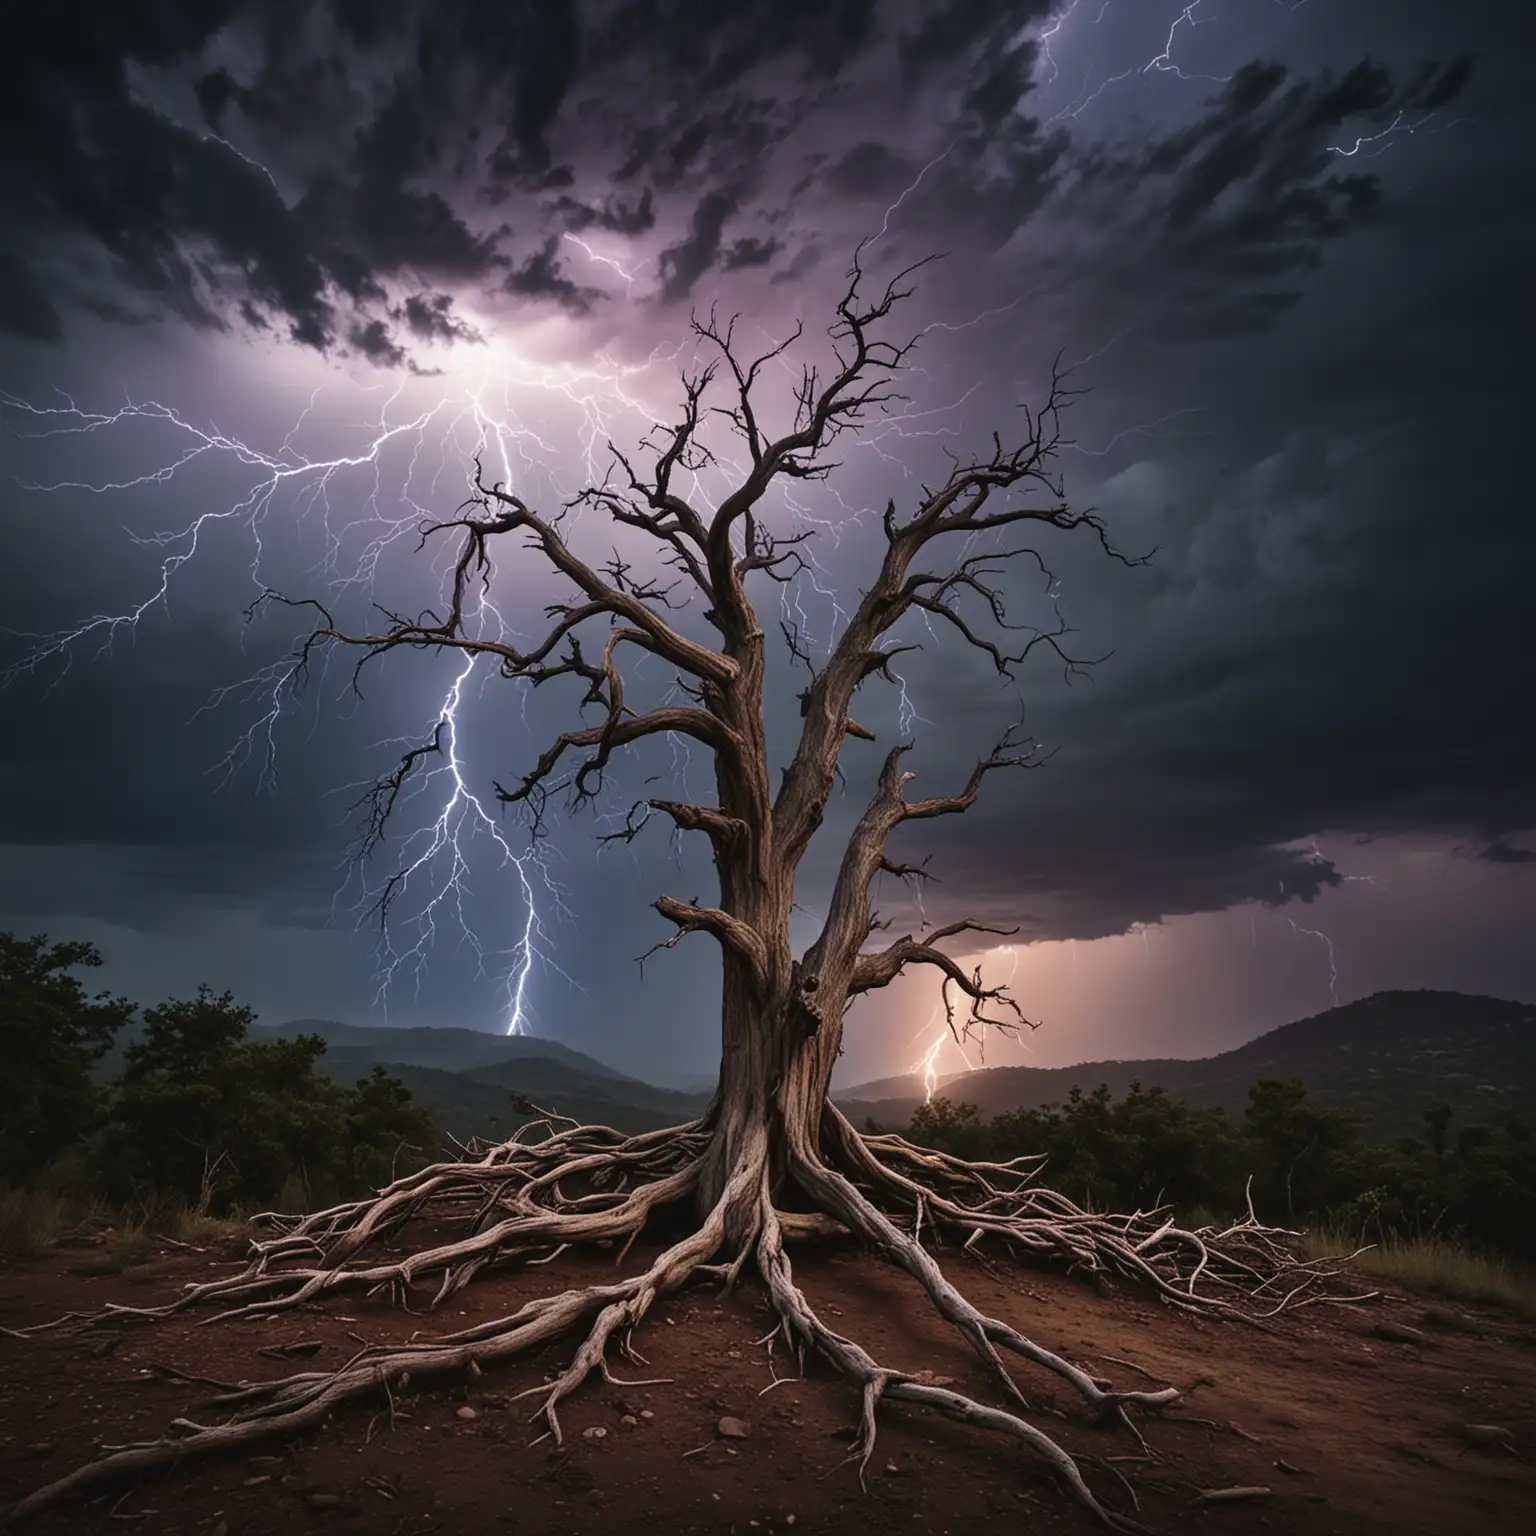 Eerie Night Thunderstorm Over Dead Tree on Scary Hill